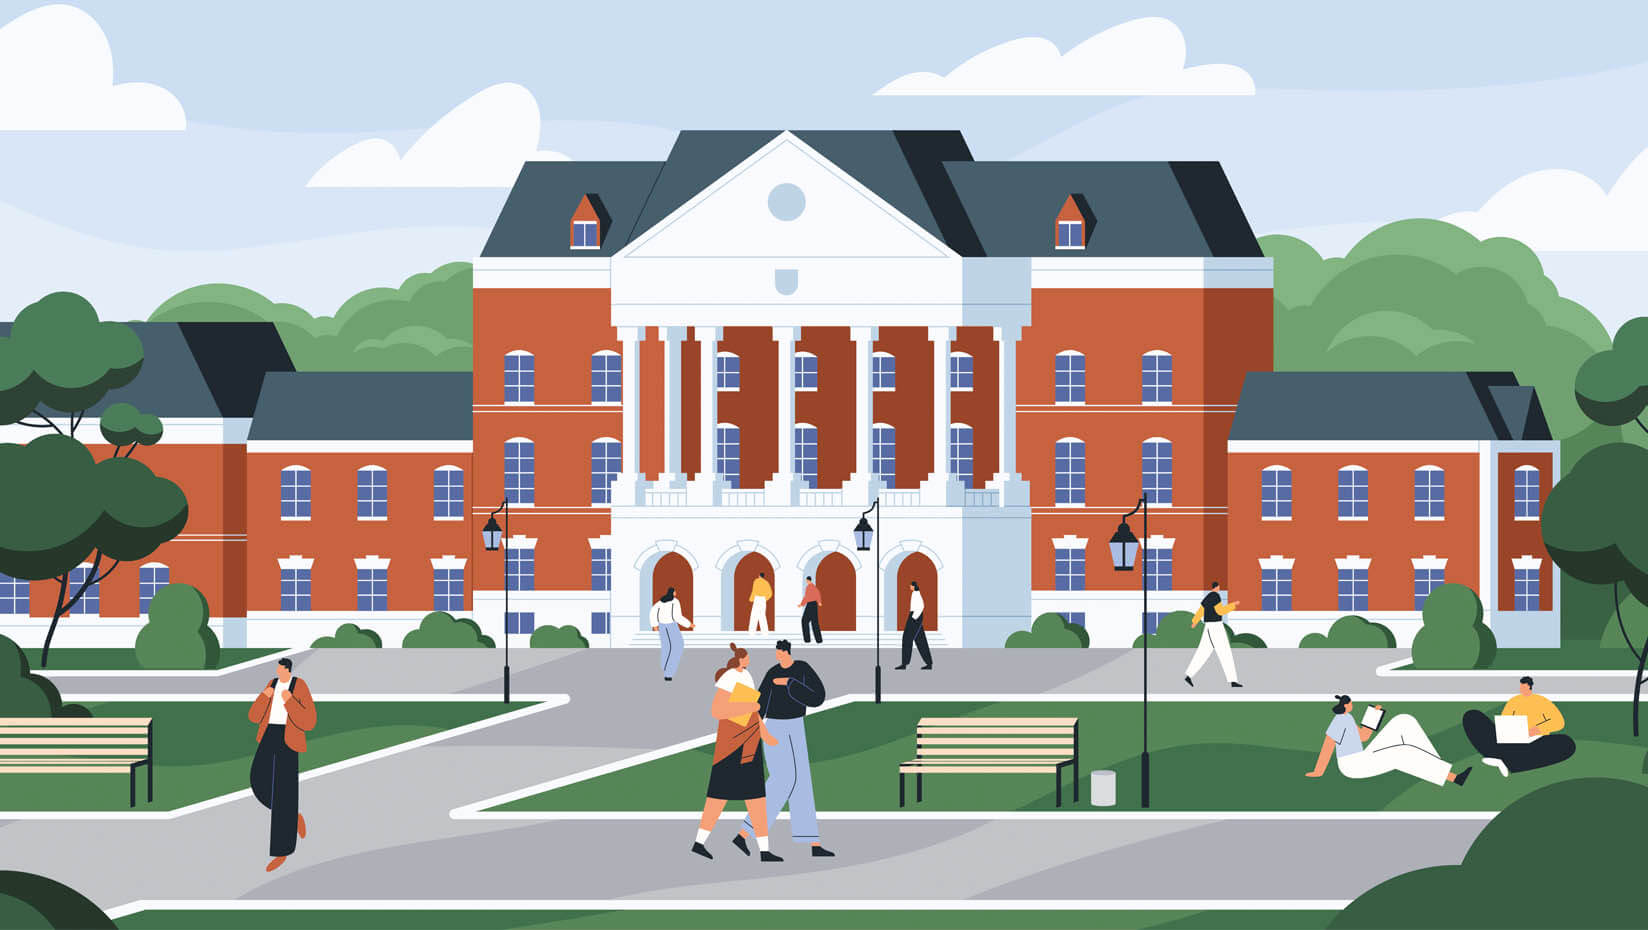 An illustration of a college campus